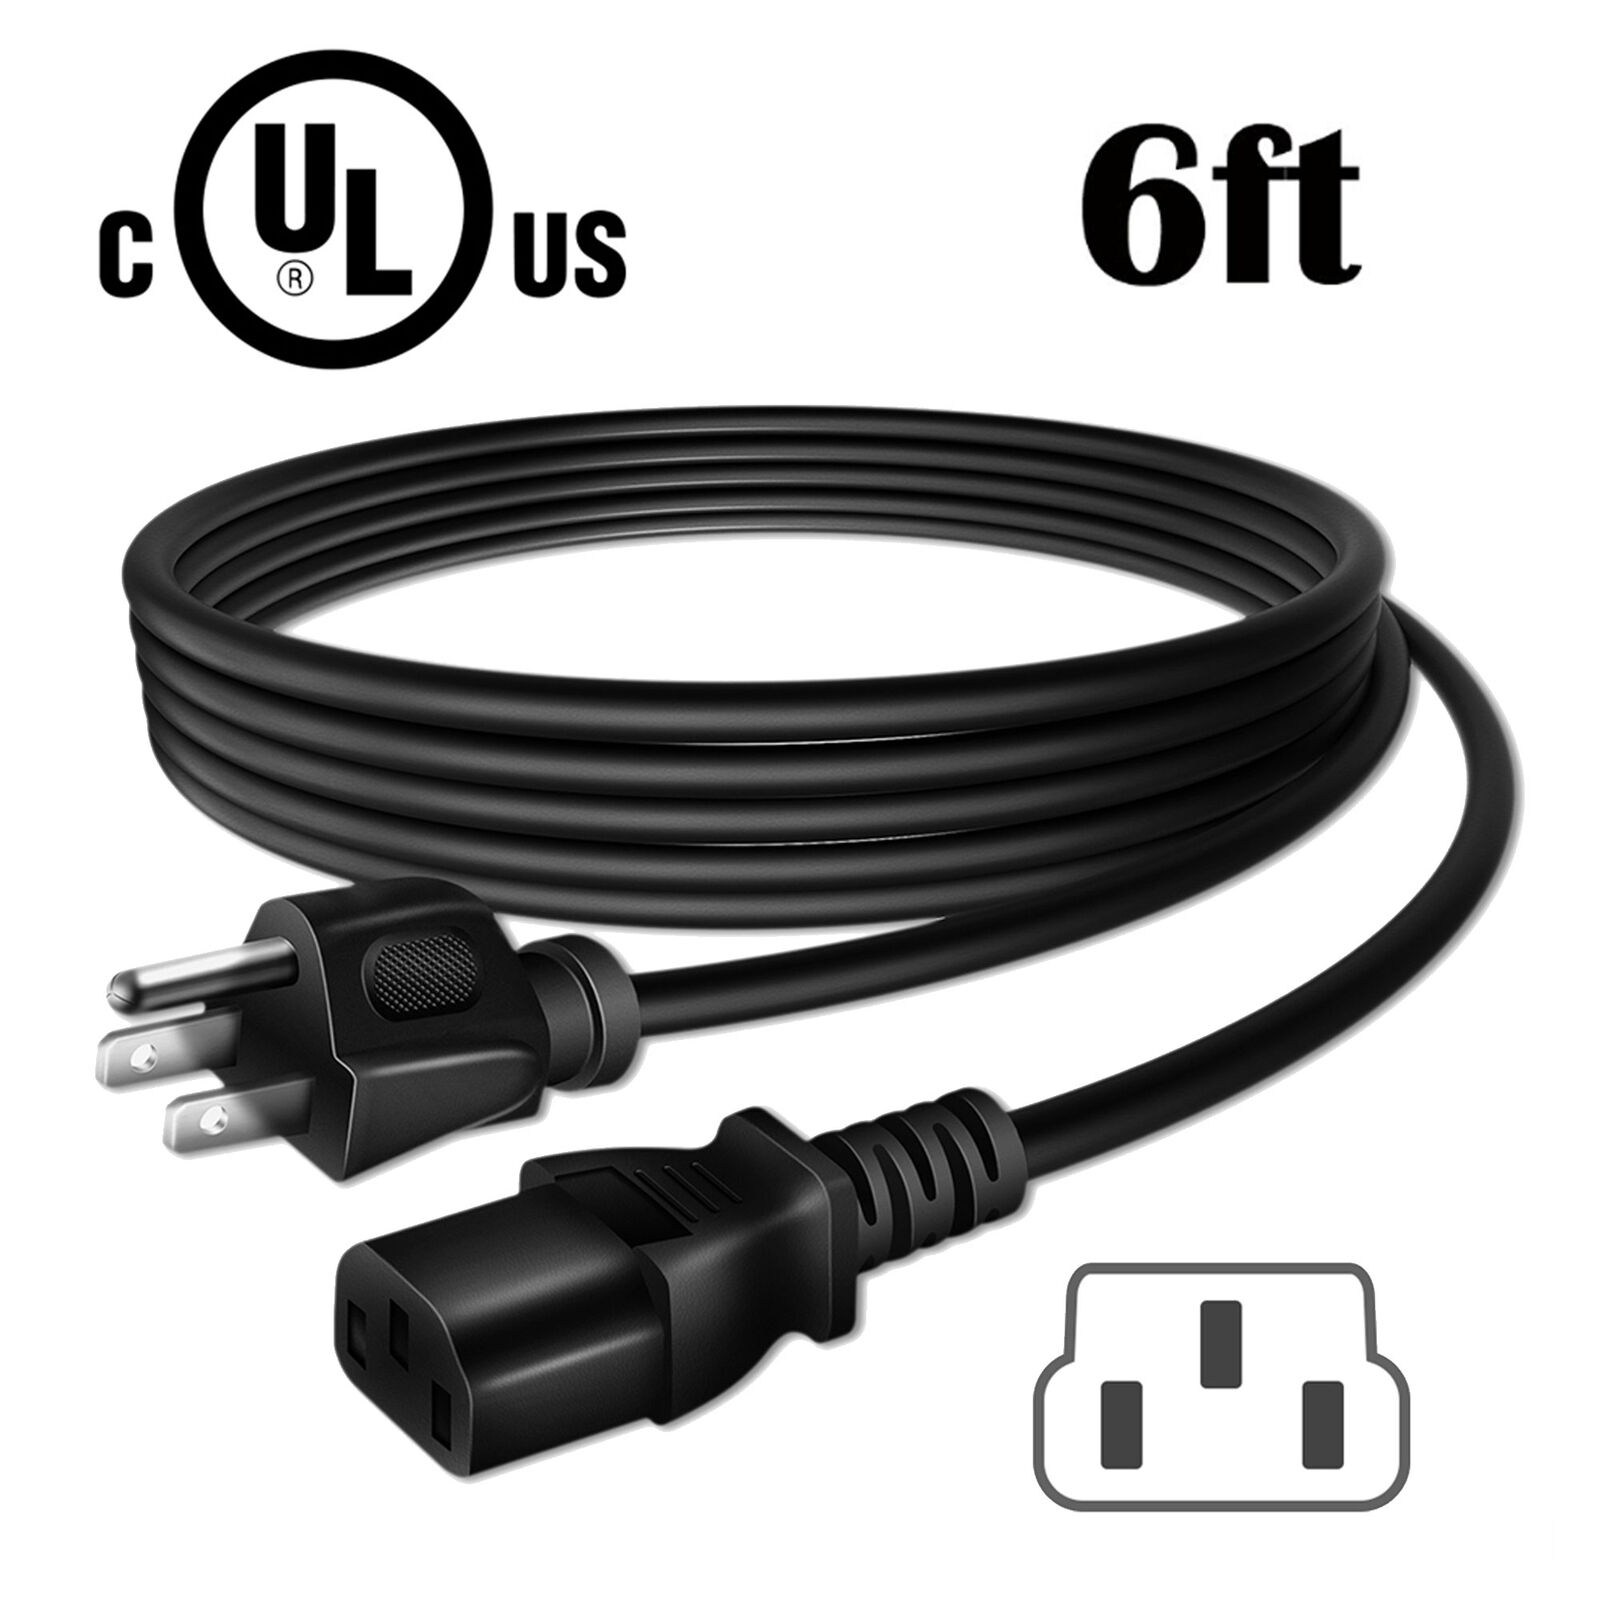 PwrON UL 6ft AC Power Cord Cable For Pressure Cooker XL model PPC780 Fusion Life